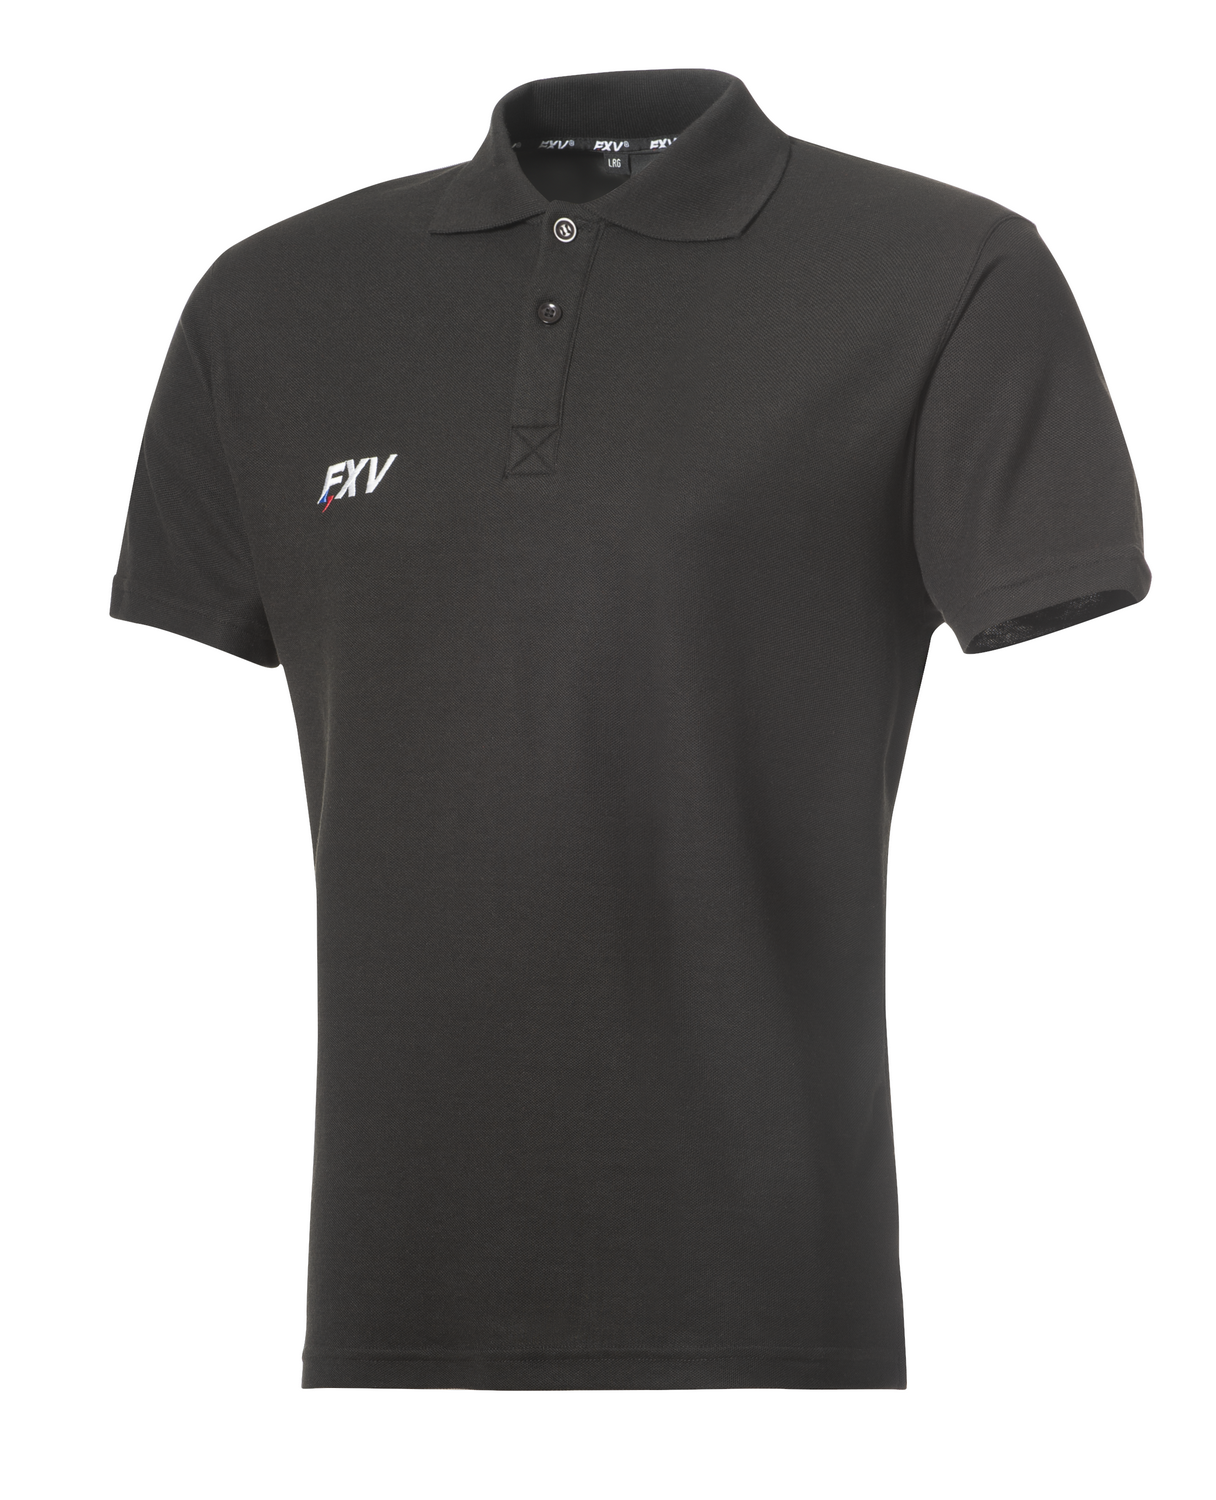 FORCE XV POLO DE RUGBY CLASSIC FORCE Noir